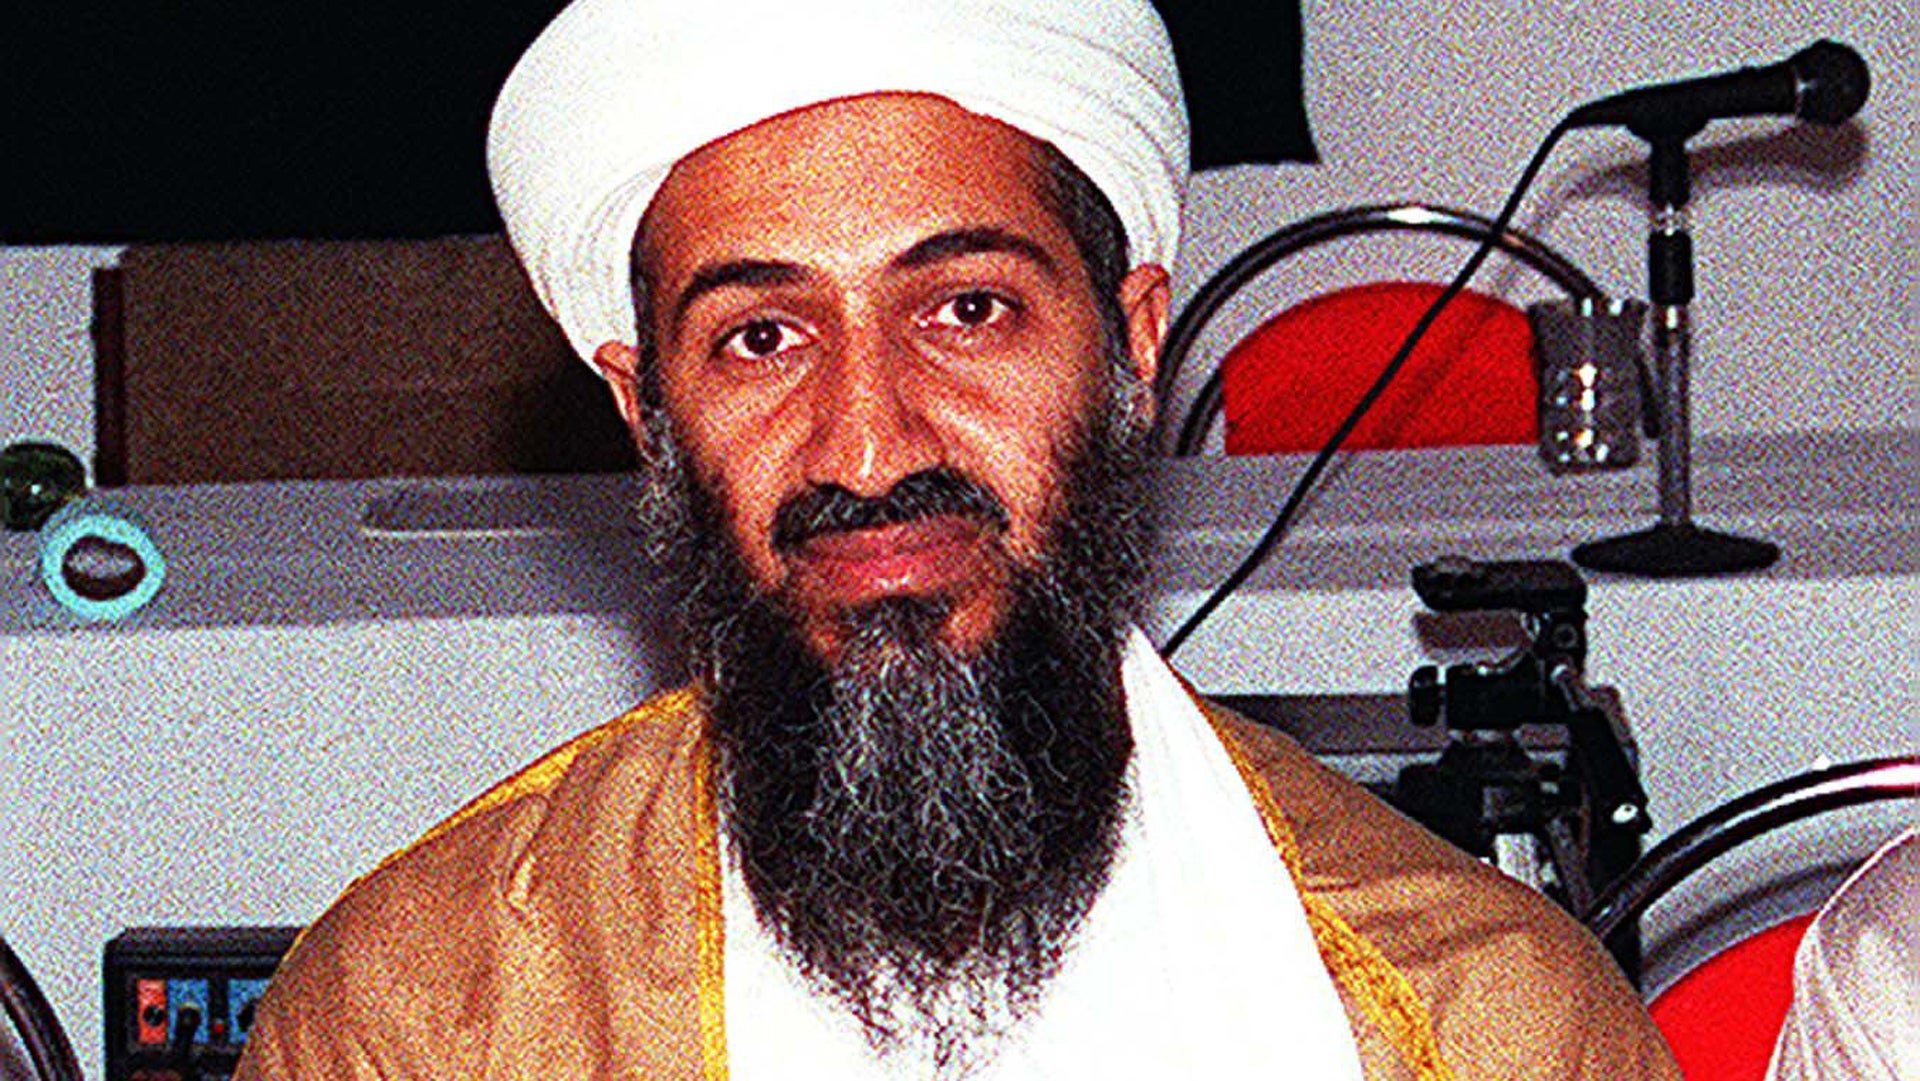 9 Unexpected Things Navy SEALs Discovered in Osama bin Laden's Compound